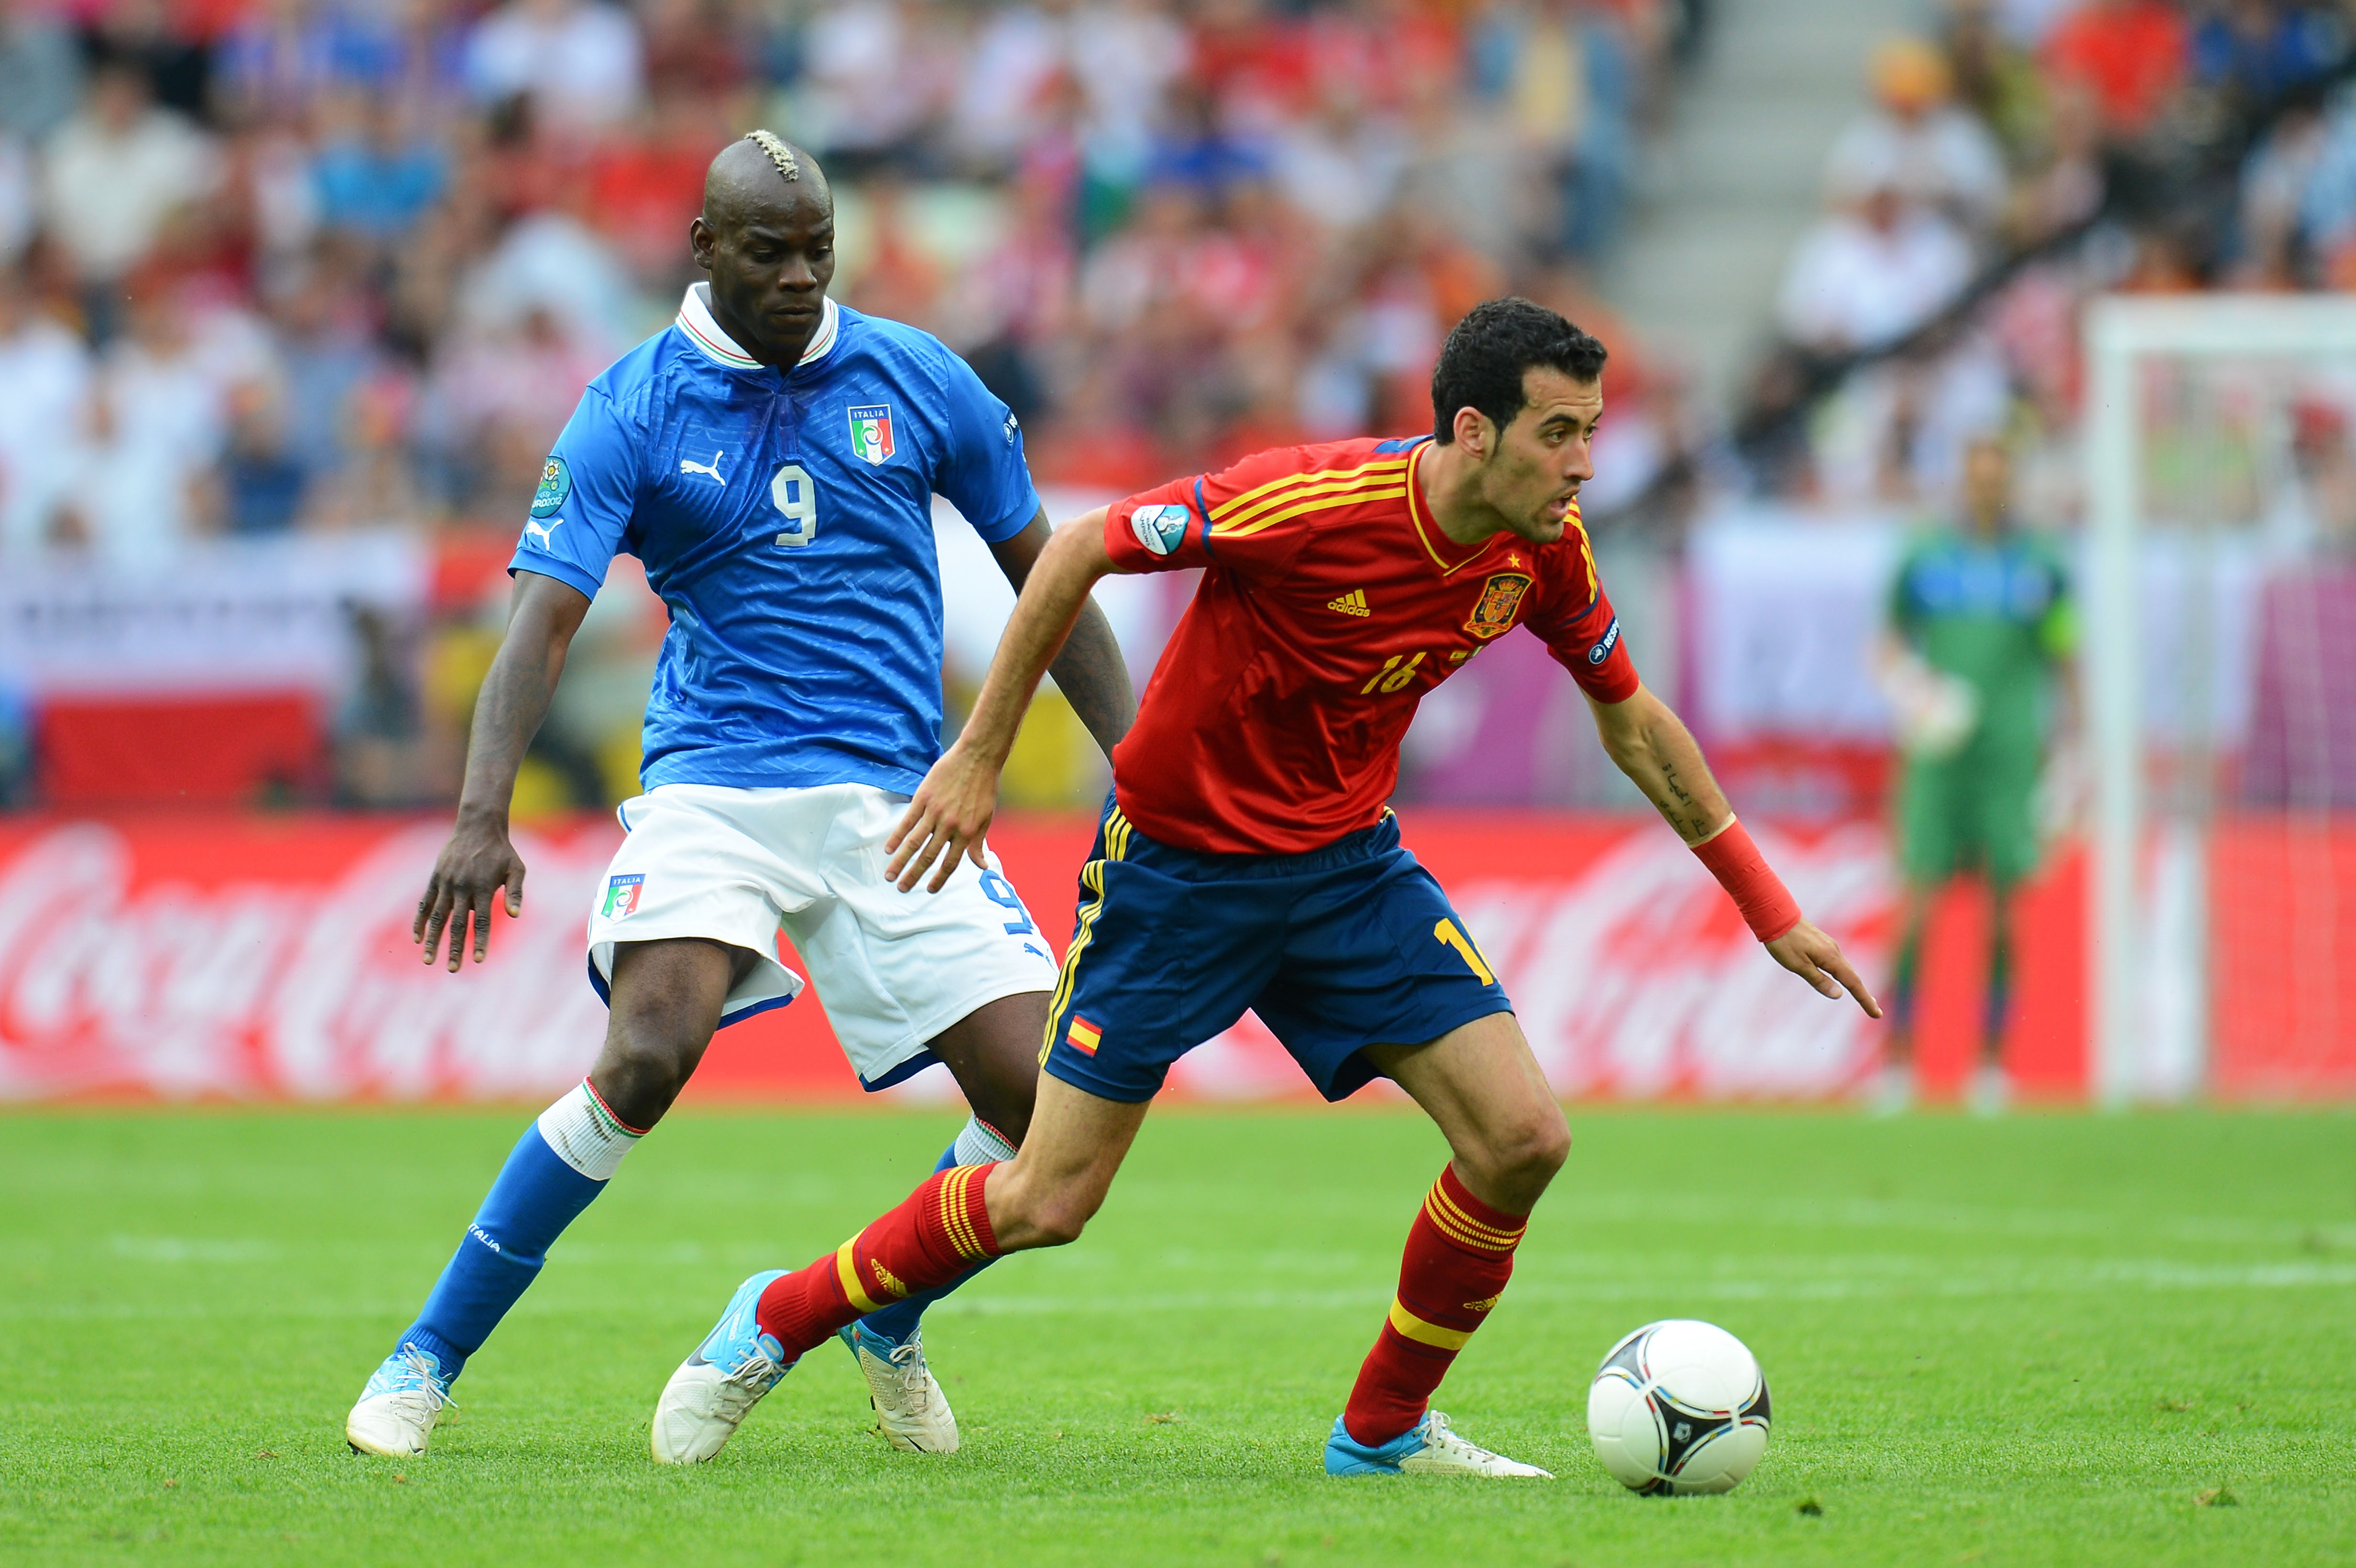 Sergio Busquets on the ball for Spain against Italy at Euro 2012.